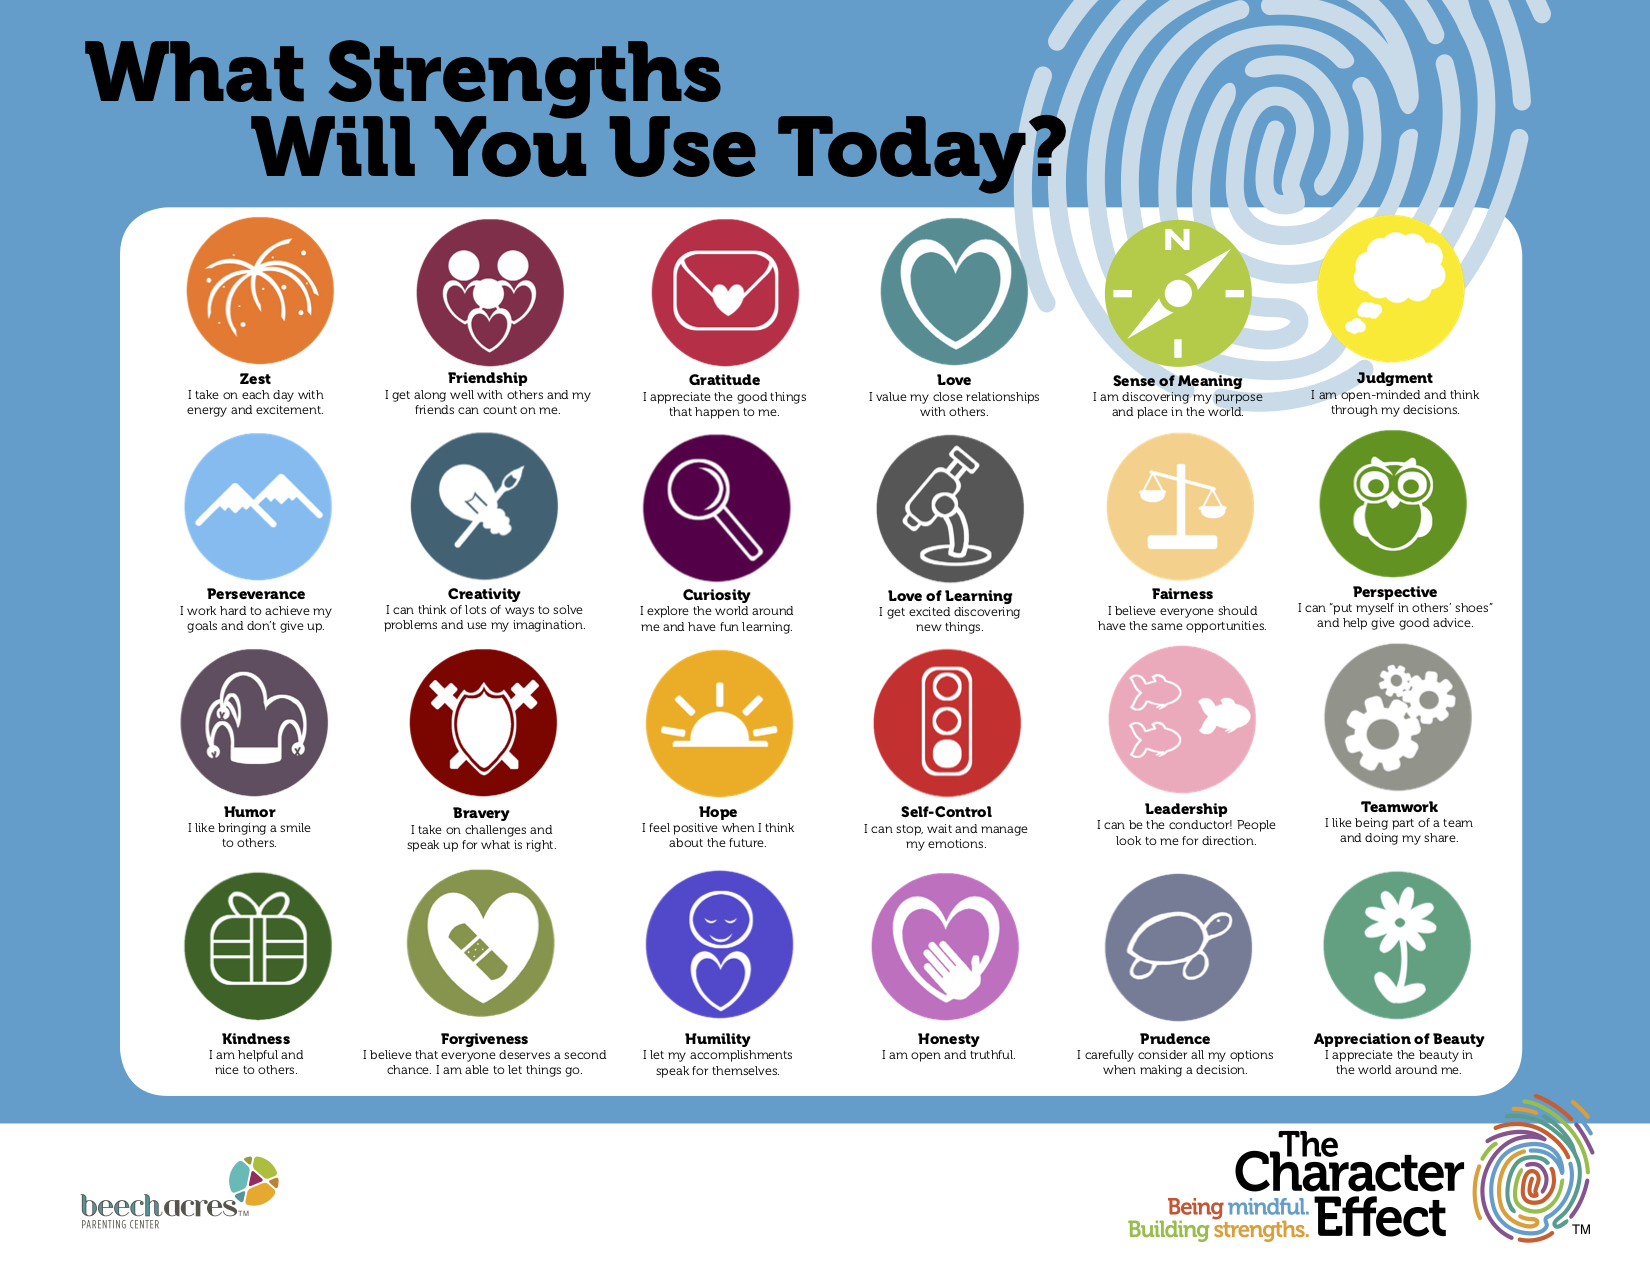 What Strengths Will You Use?